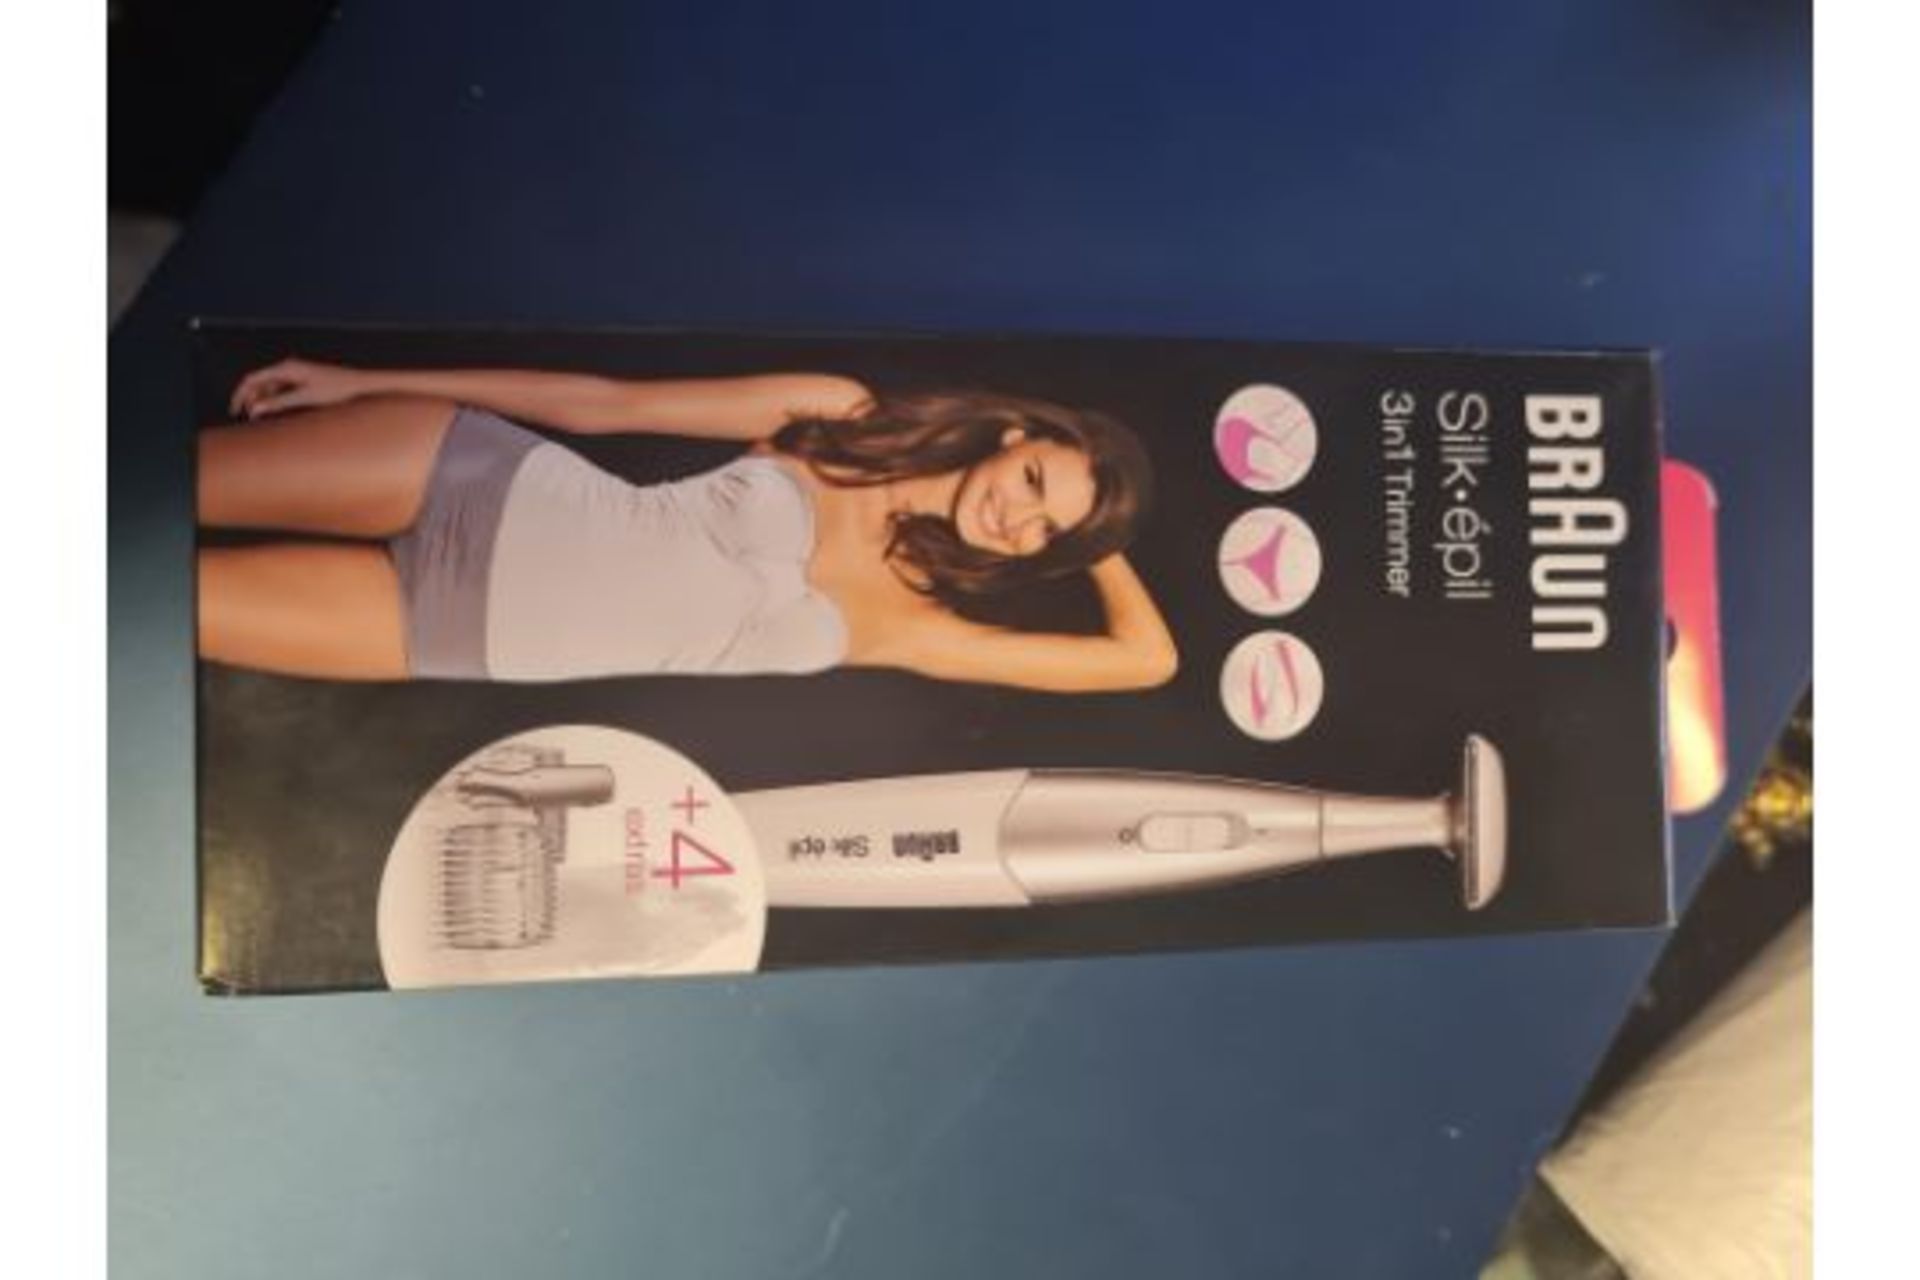 New 3 in 1 trimmer